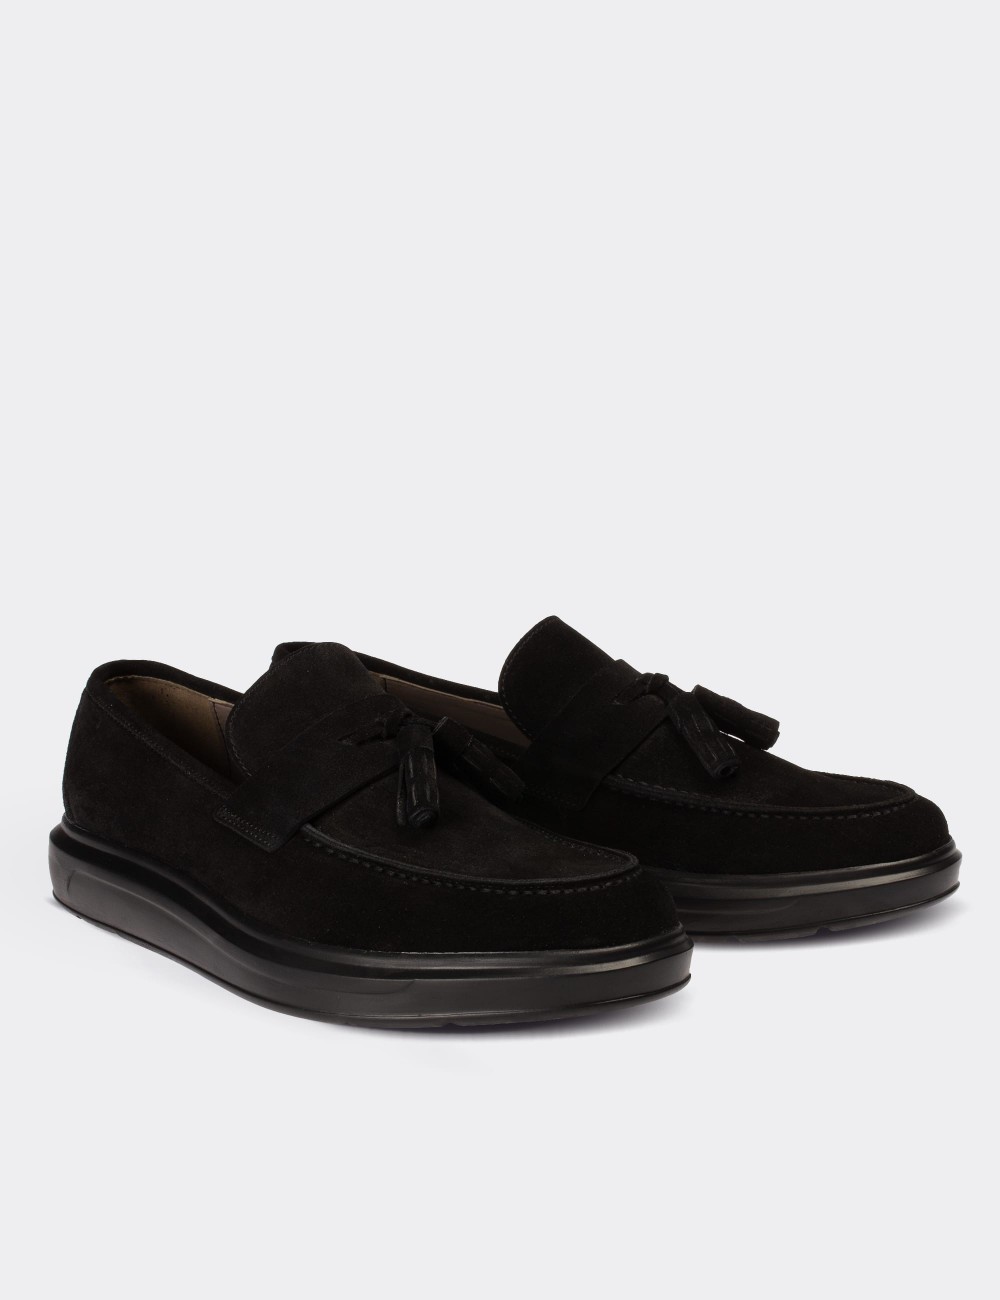 Black Suede Leather Loafers - 01587MSYHP05